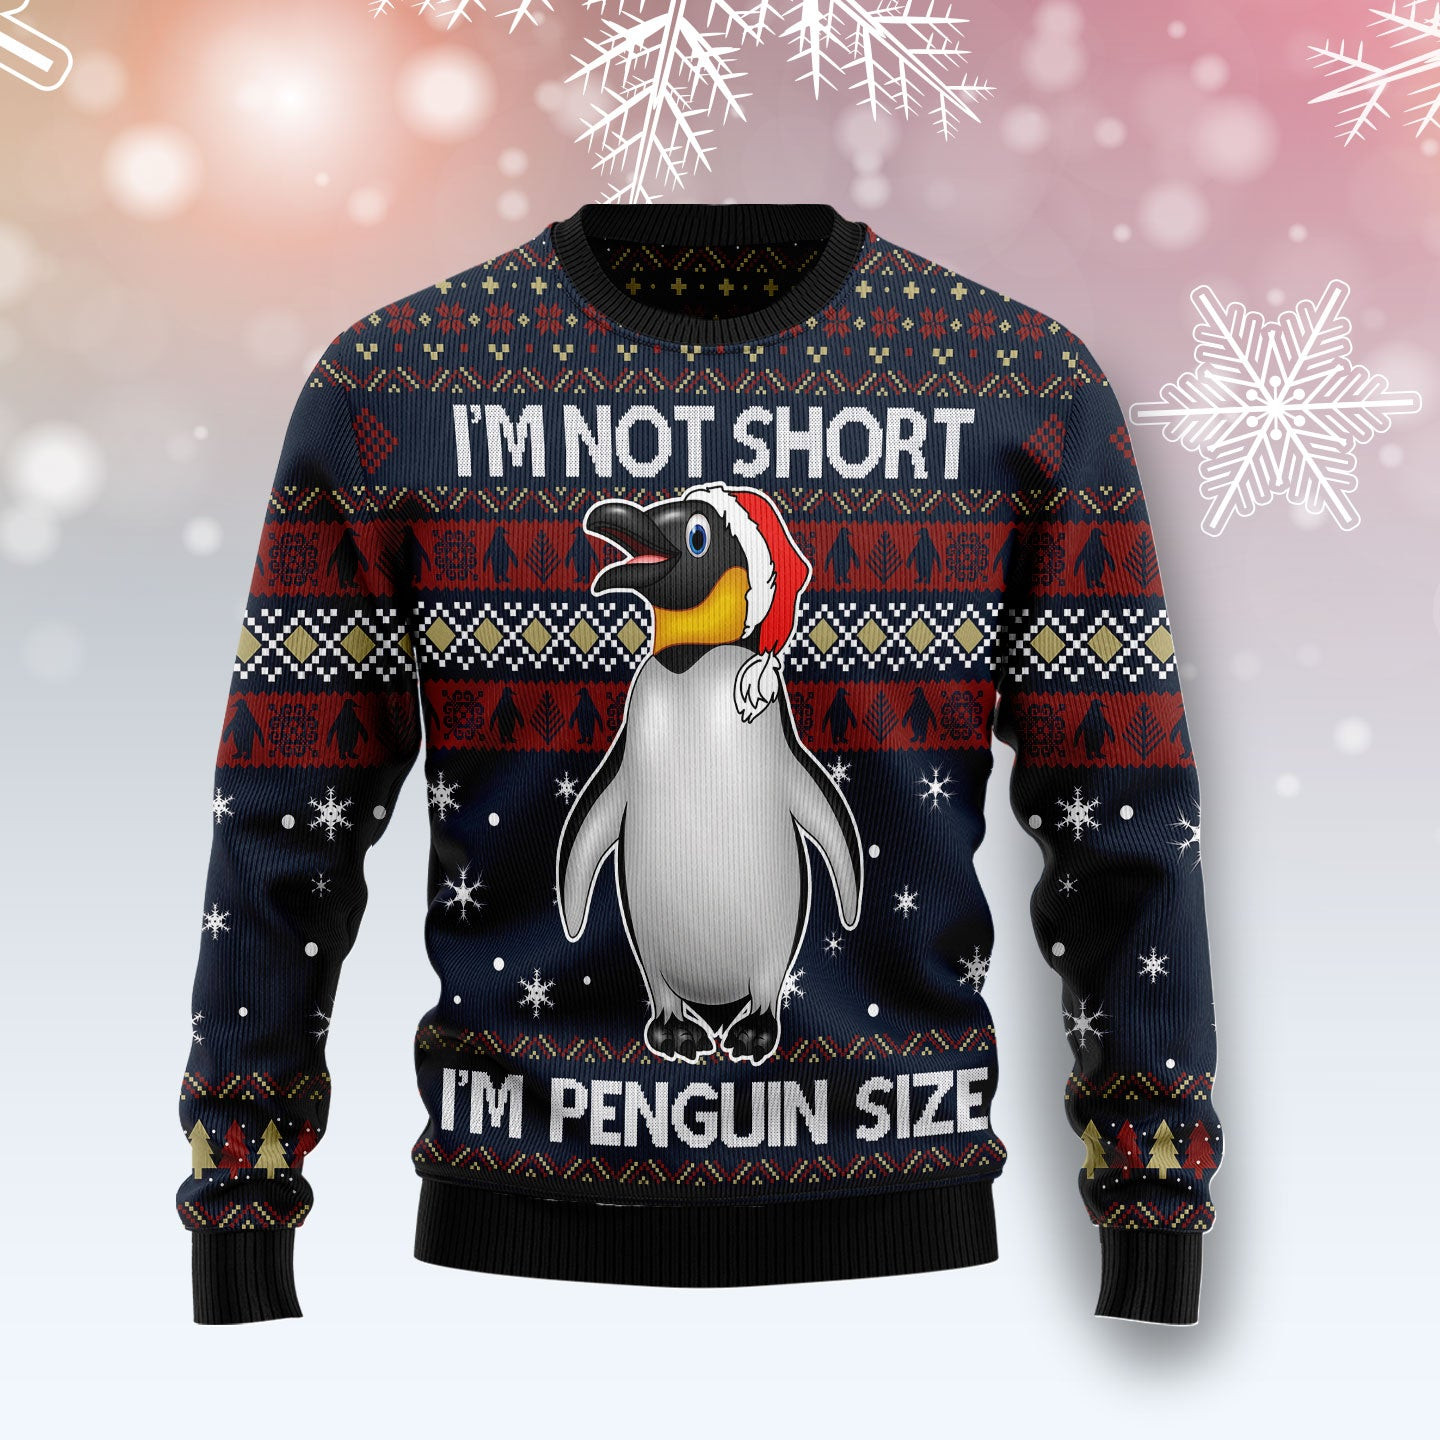 Im Not Short Im Penguin Size Ugly Christmas Sweater, Ugly Sweater For Men Women, Holiday Sweater